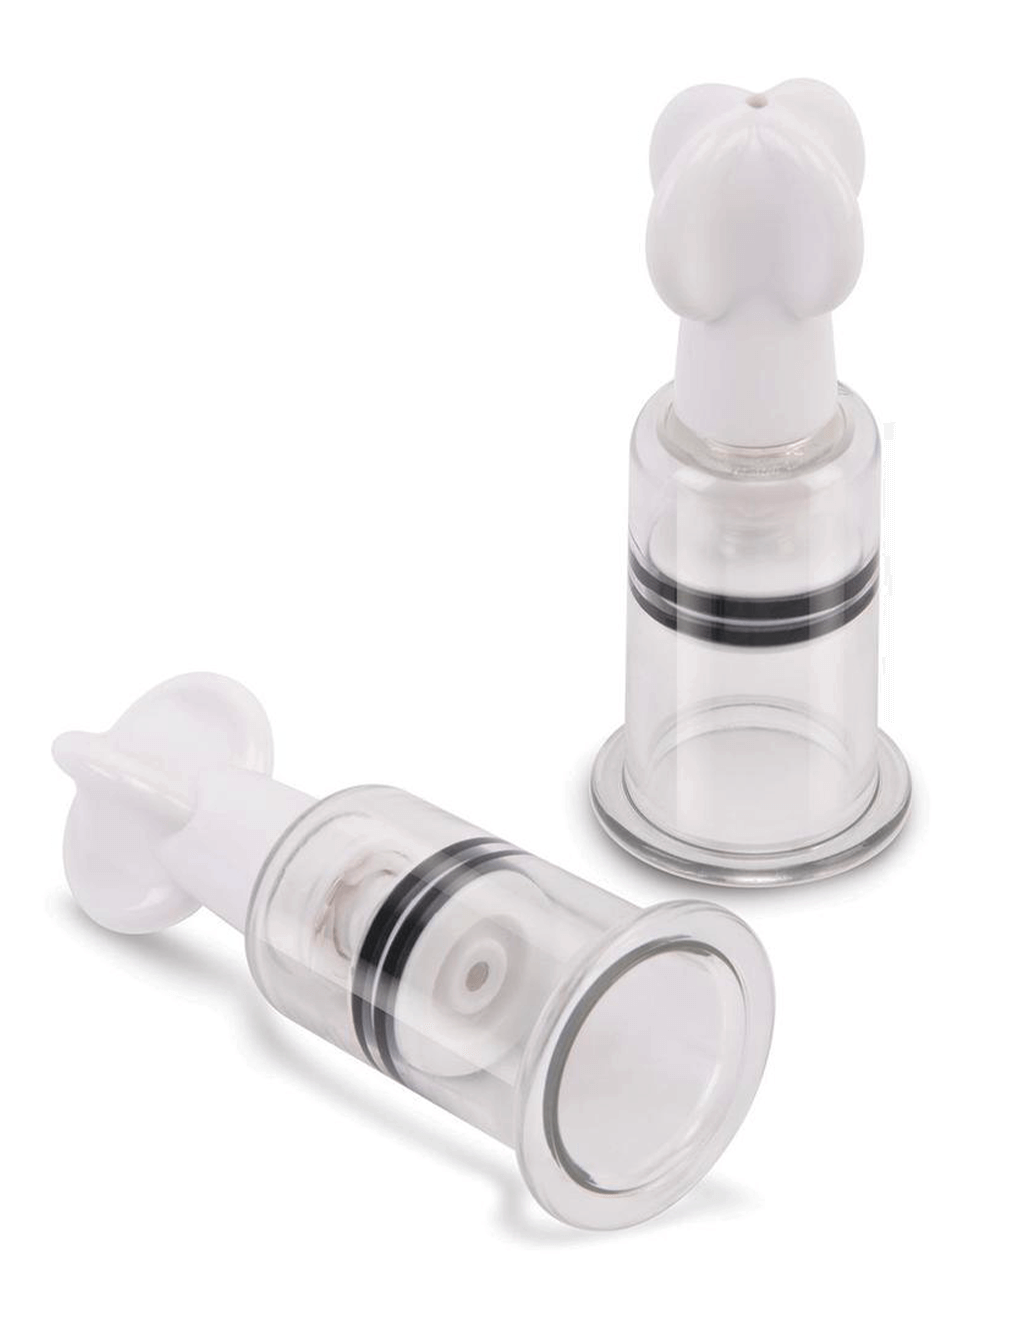 Size Up Twisty Nipple Suckers - Small - Product